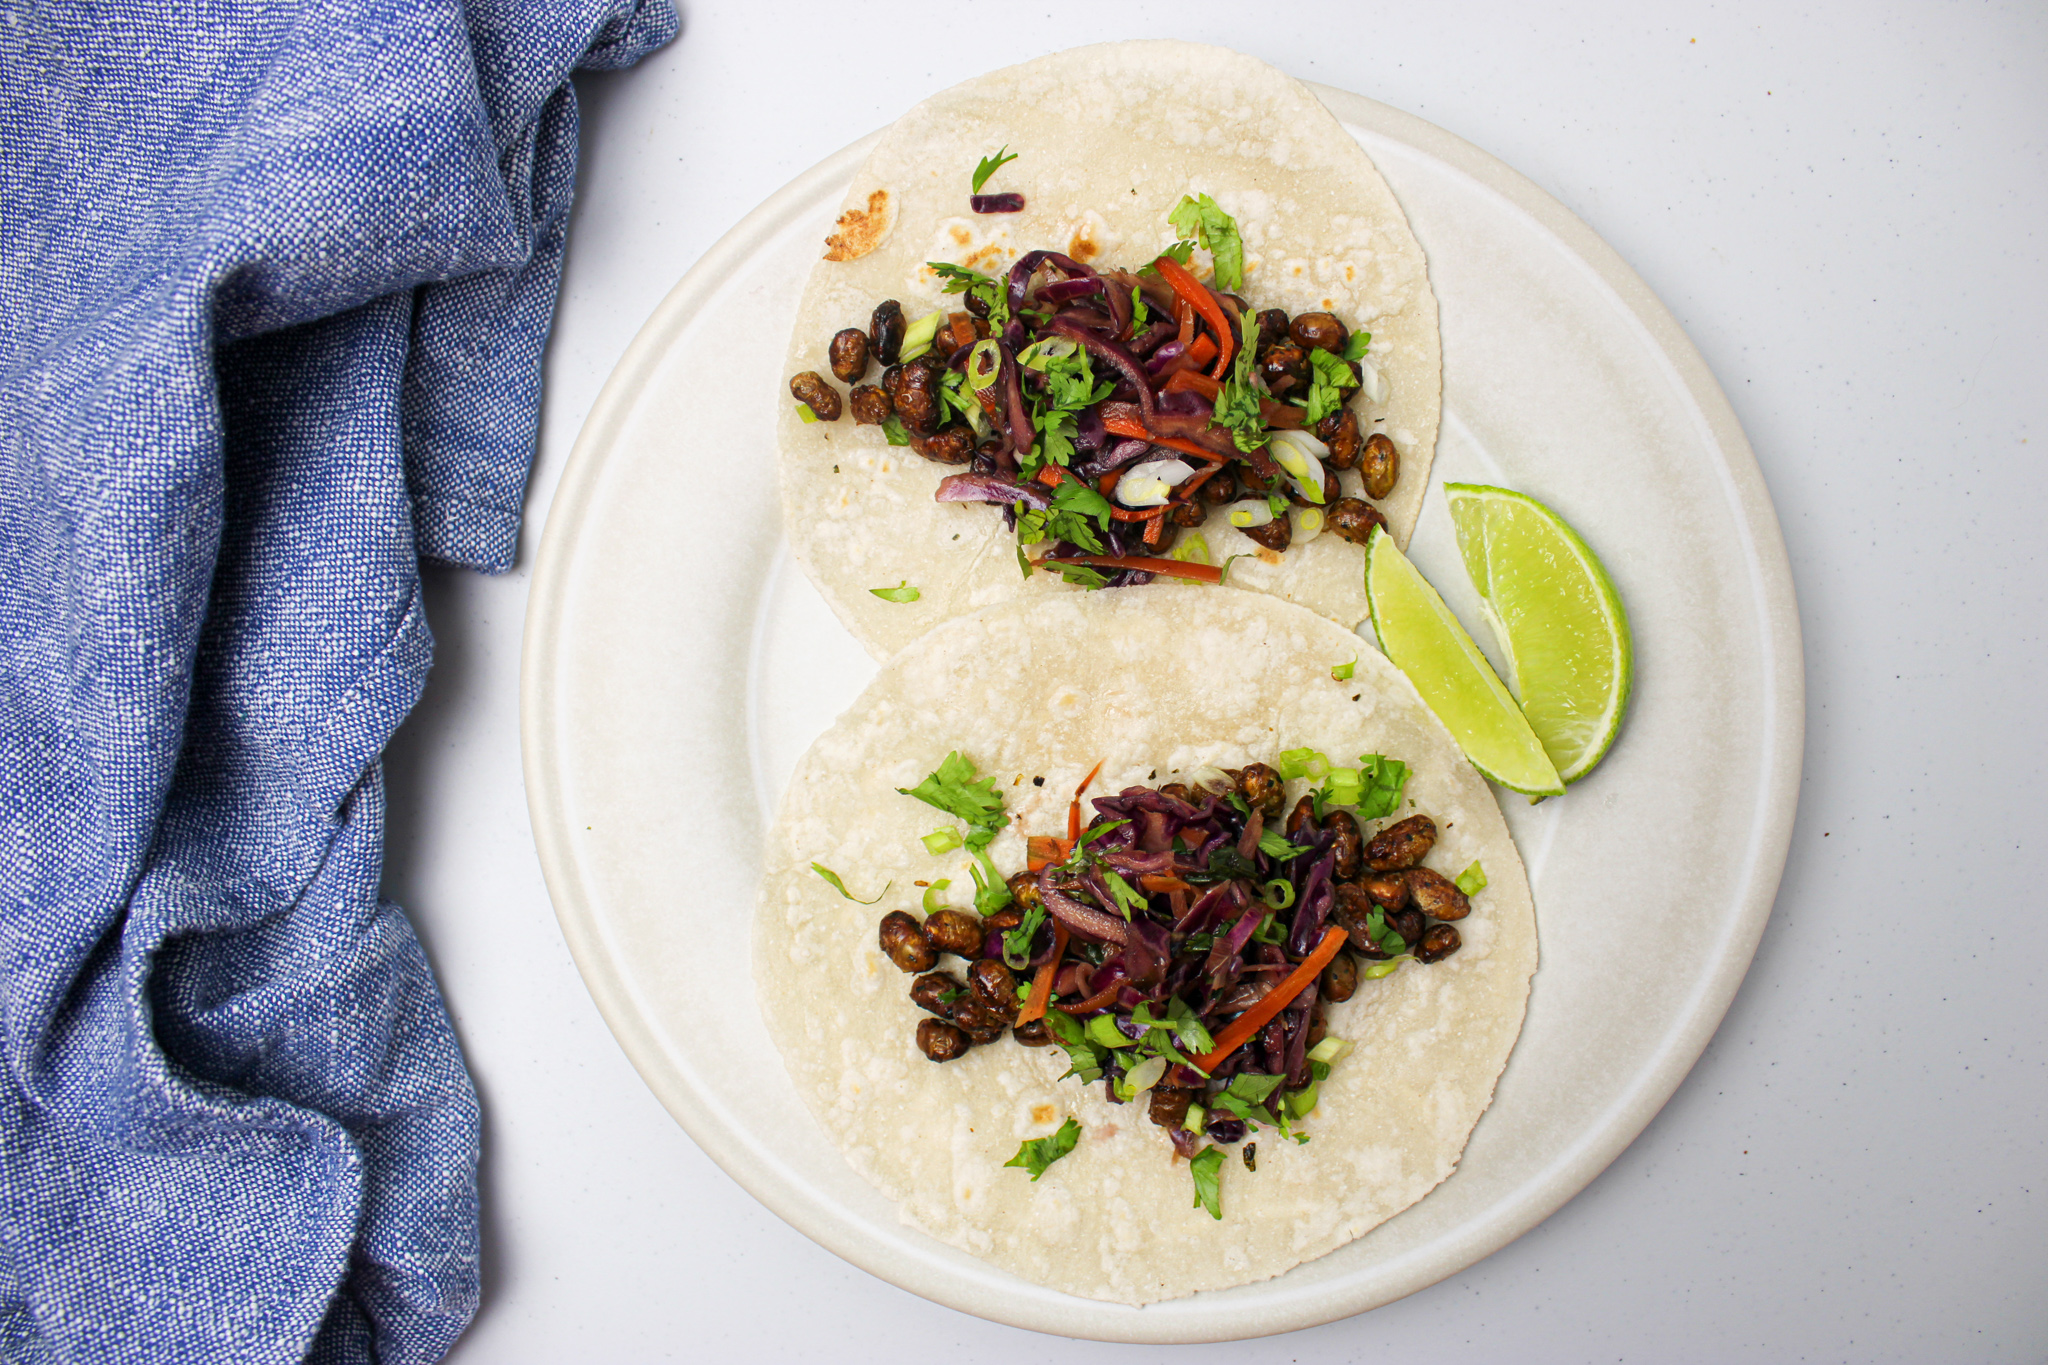 Tacos filled with crispy edamame and asian slaw